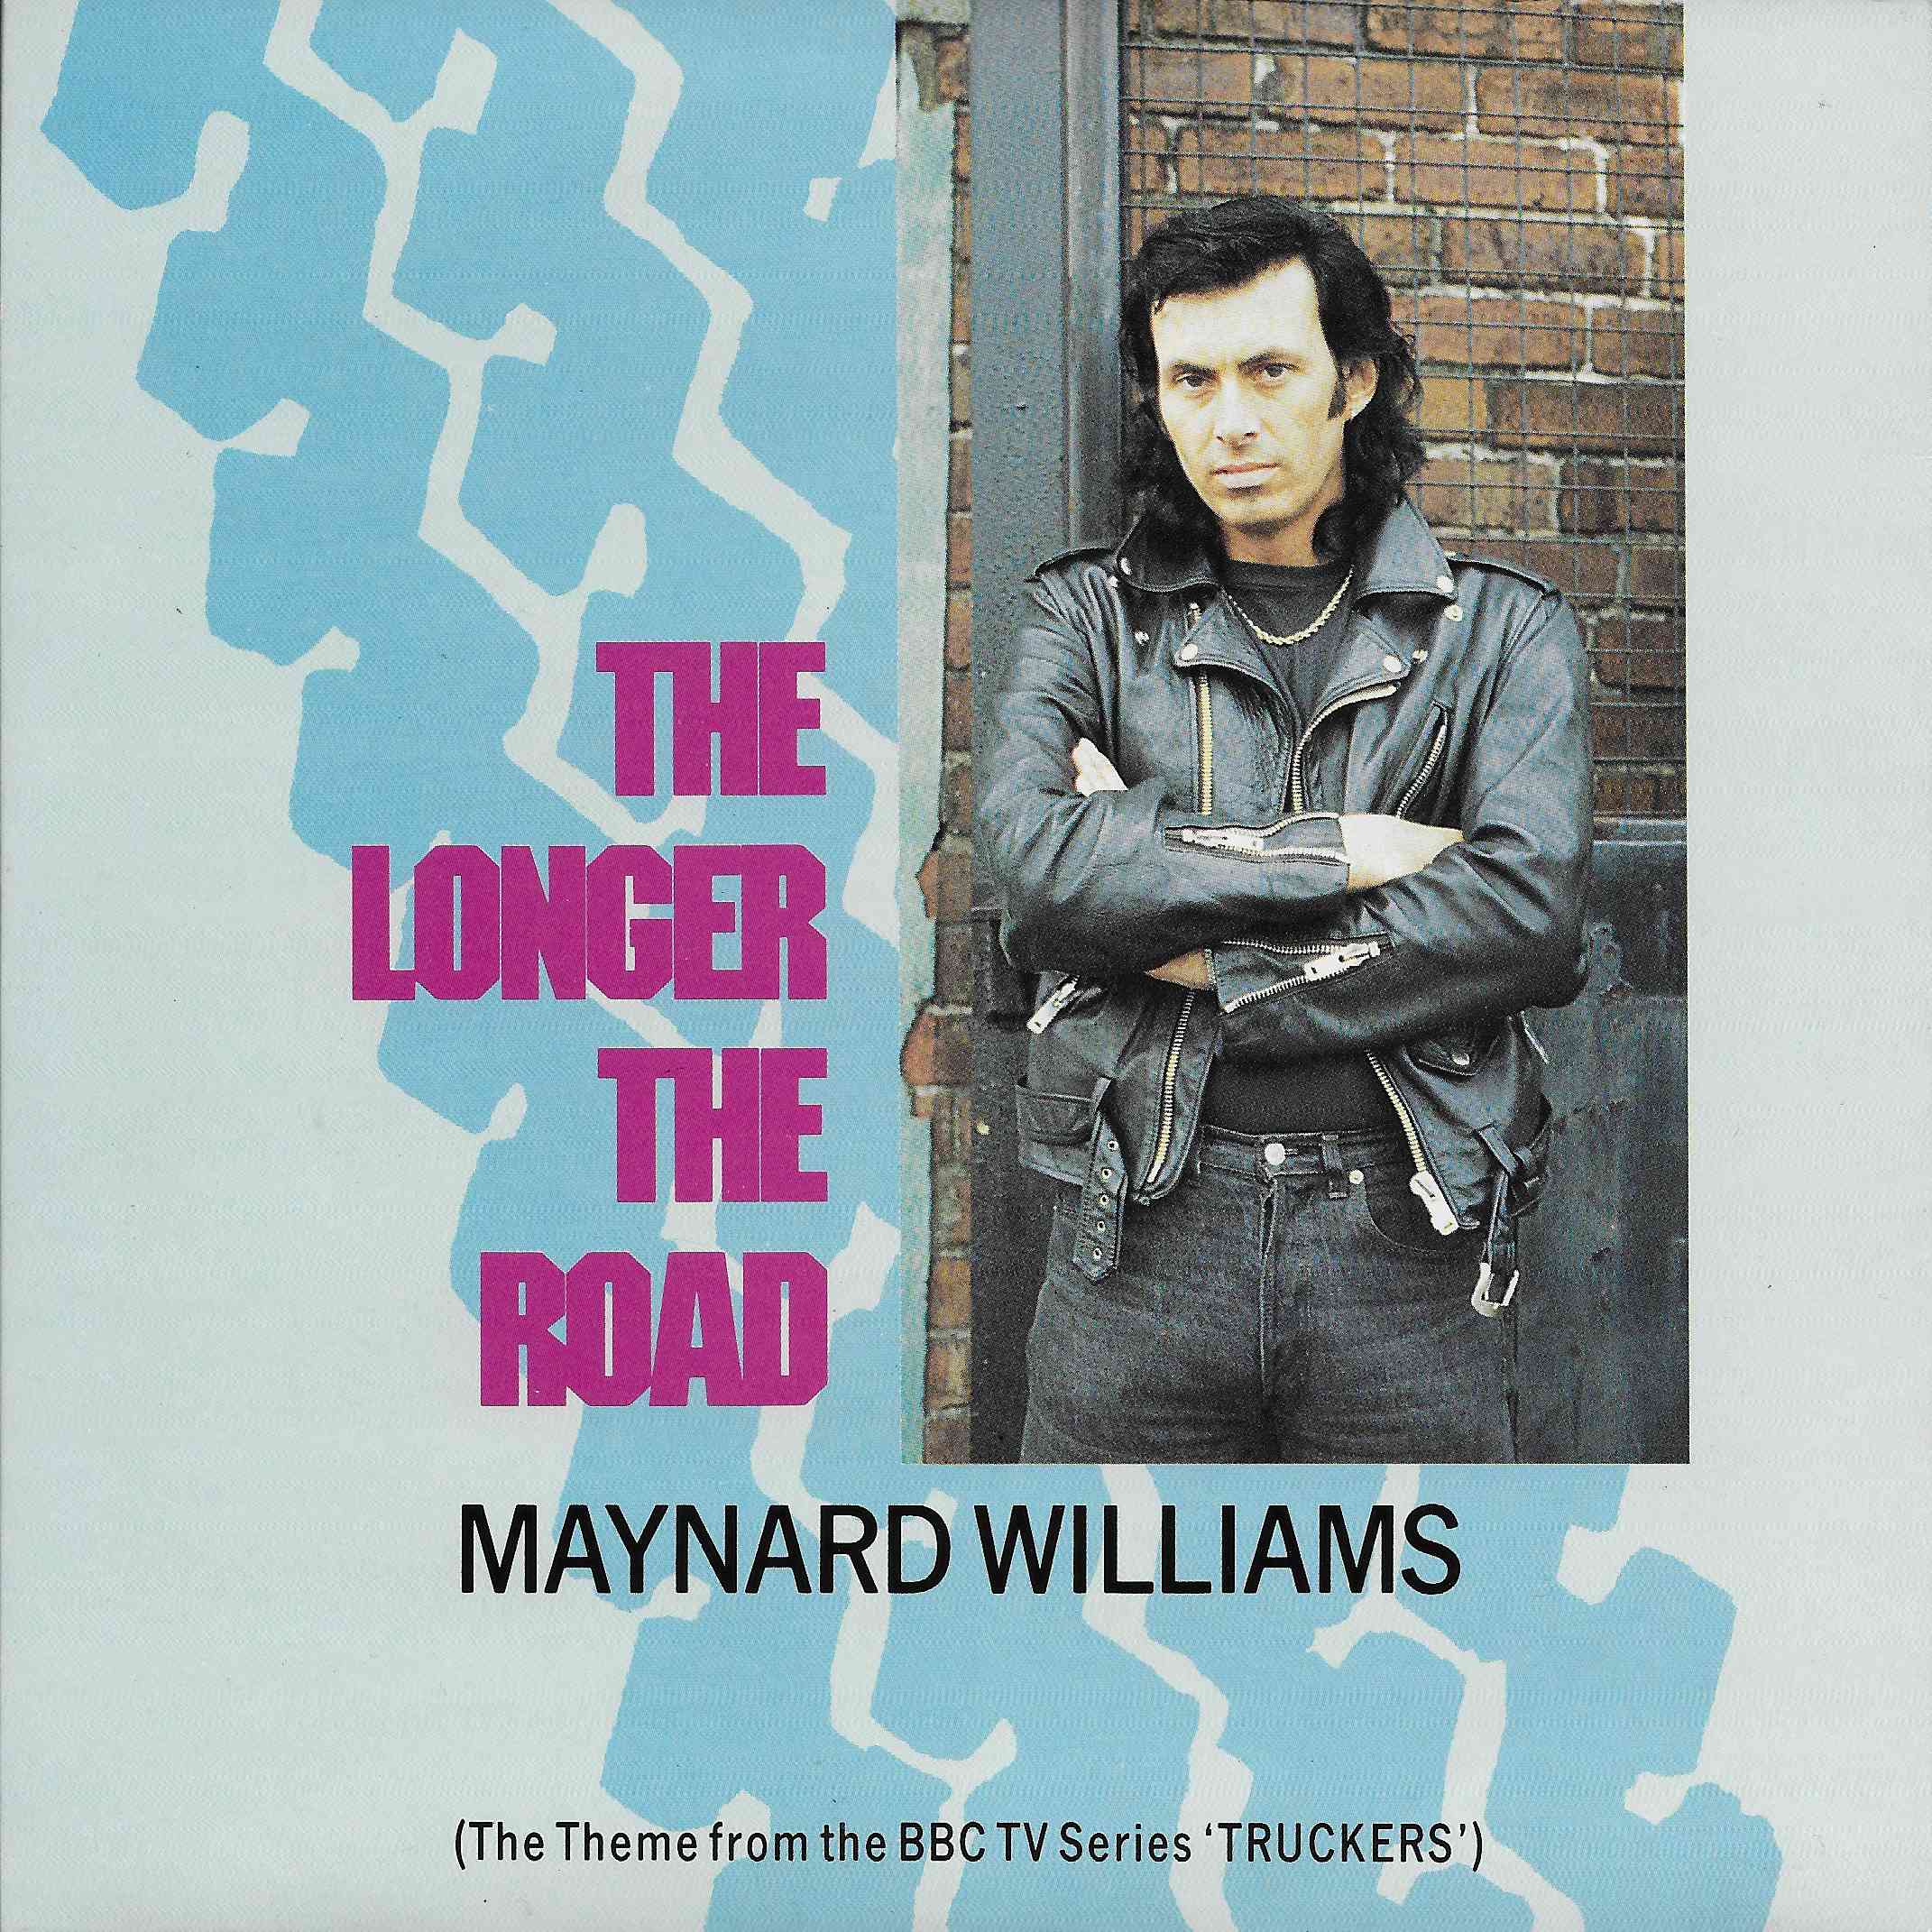 Picture of The longer the road (Theme from Truckers) by artist Maynard Williams from the BBC singles - Records and Tapes library